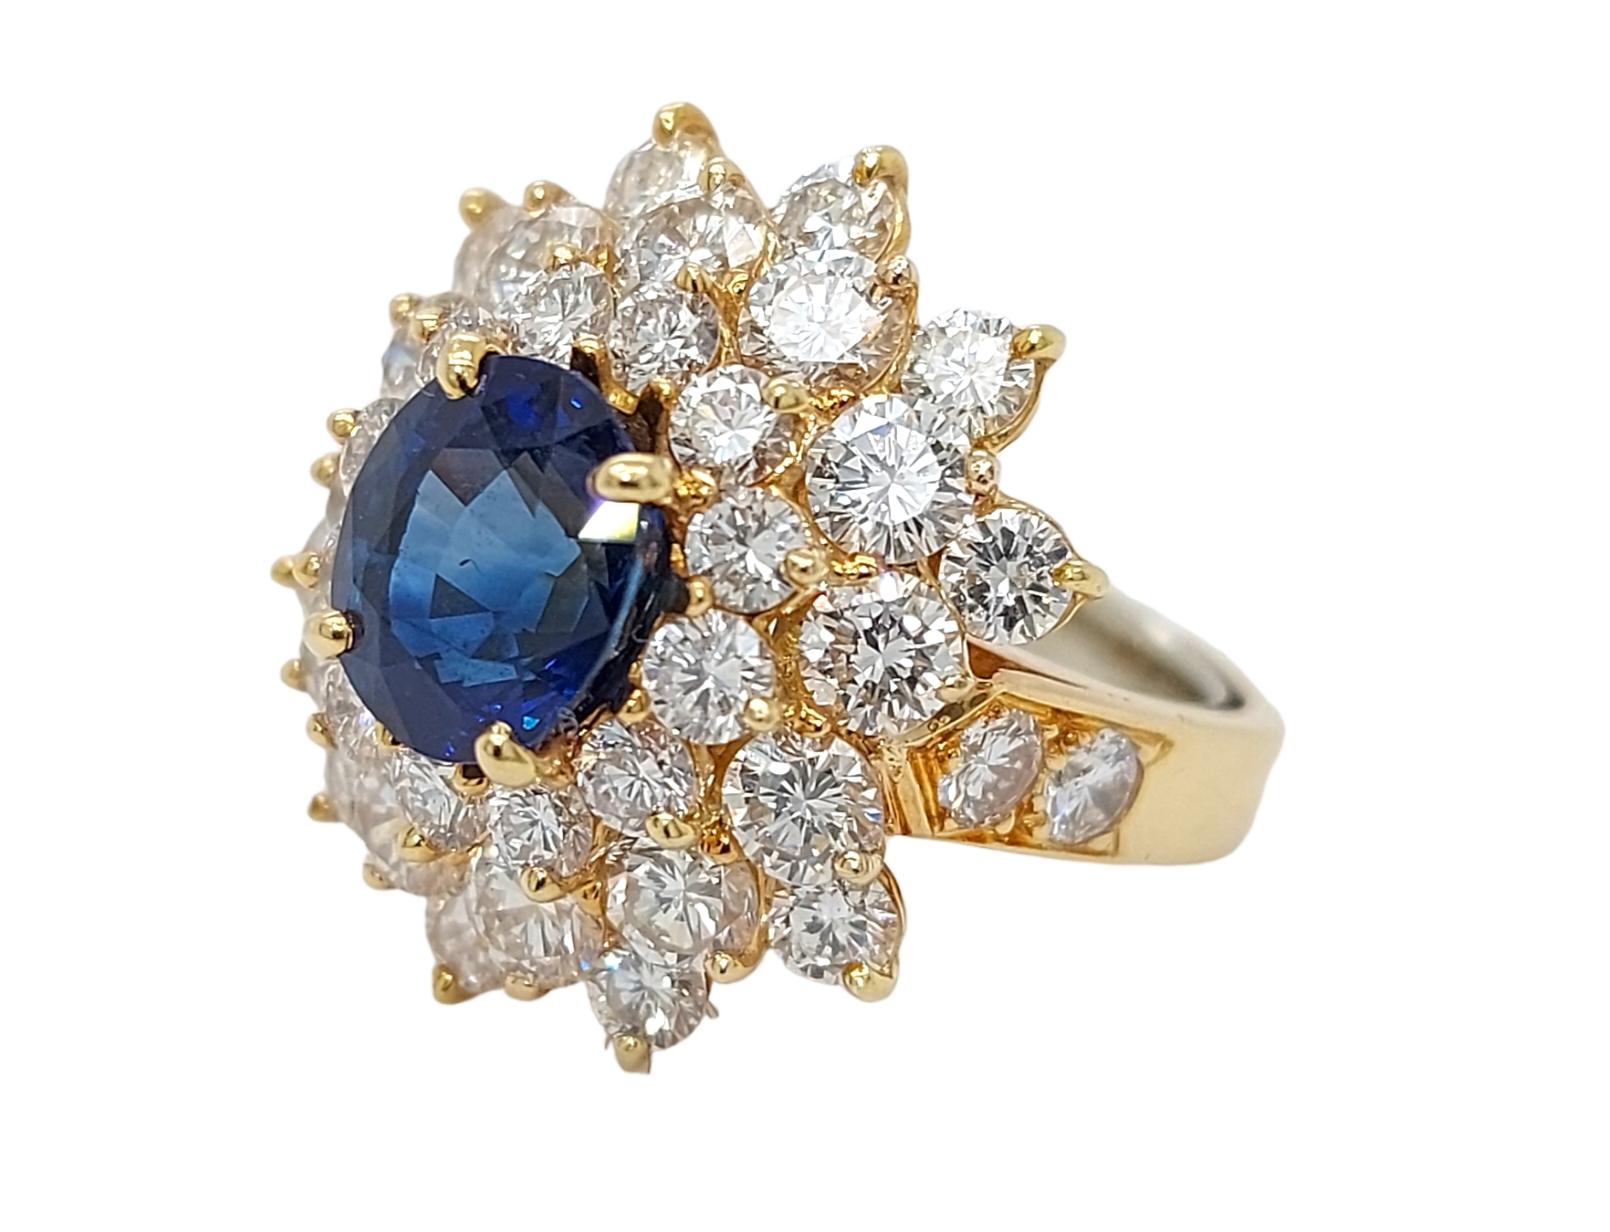 Oval Cut 18 kt Yellow Gold Ring with 2ct Sapphire and 2.8ct Diamonds, Estate Sultan Oman For Sale